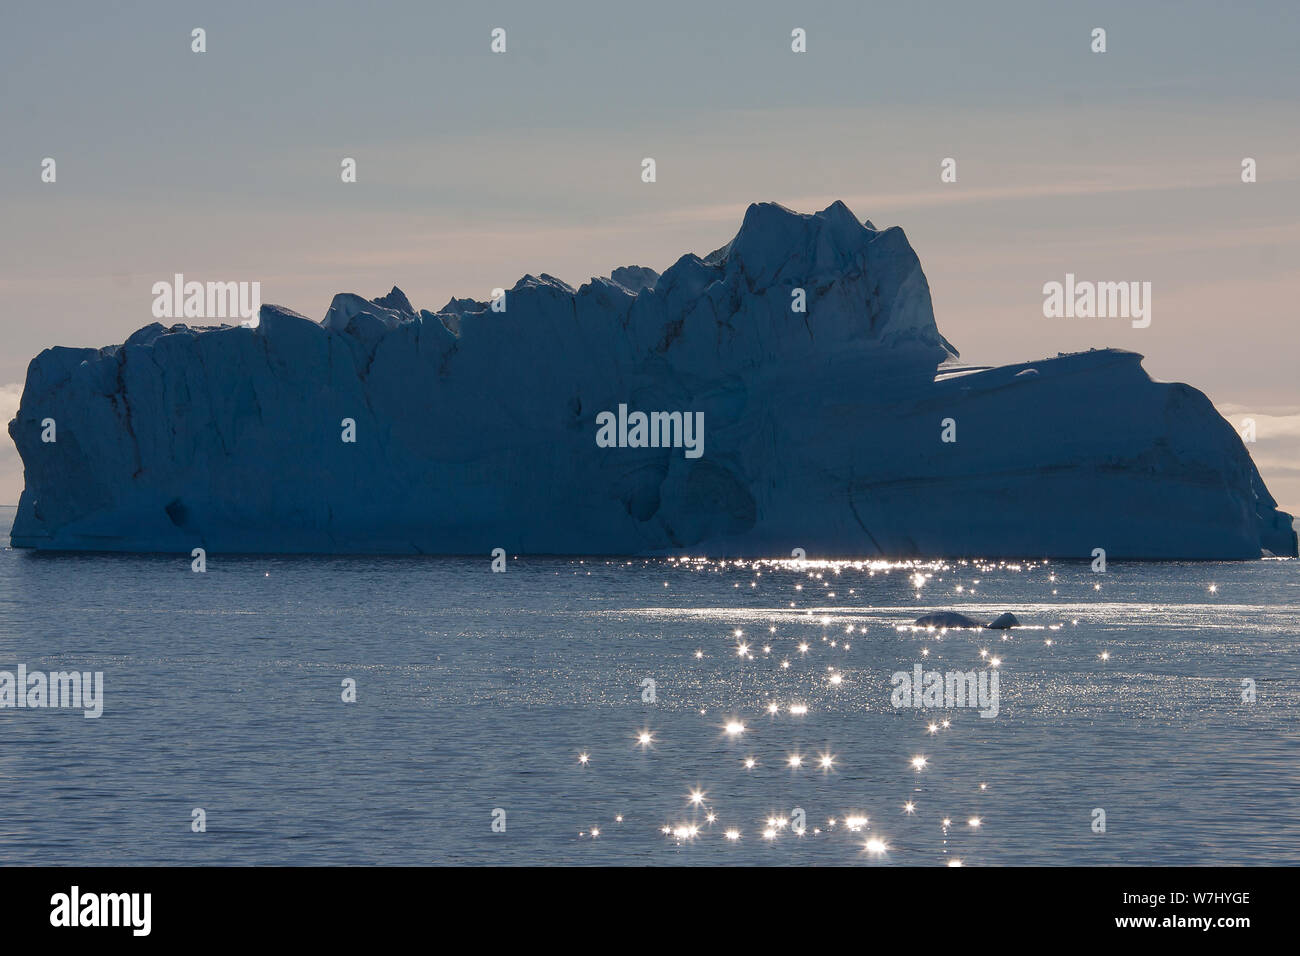 Dazzling lights dance on the shallow waves in front of a massive iceberg in the bay around Sydkap, Greenland. Stock Photo